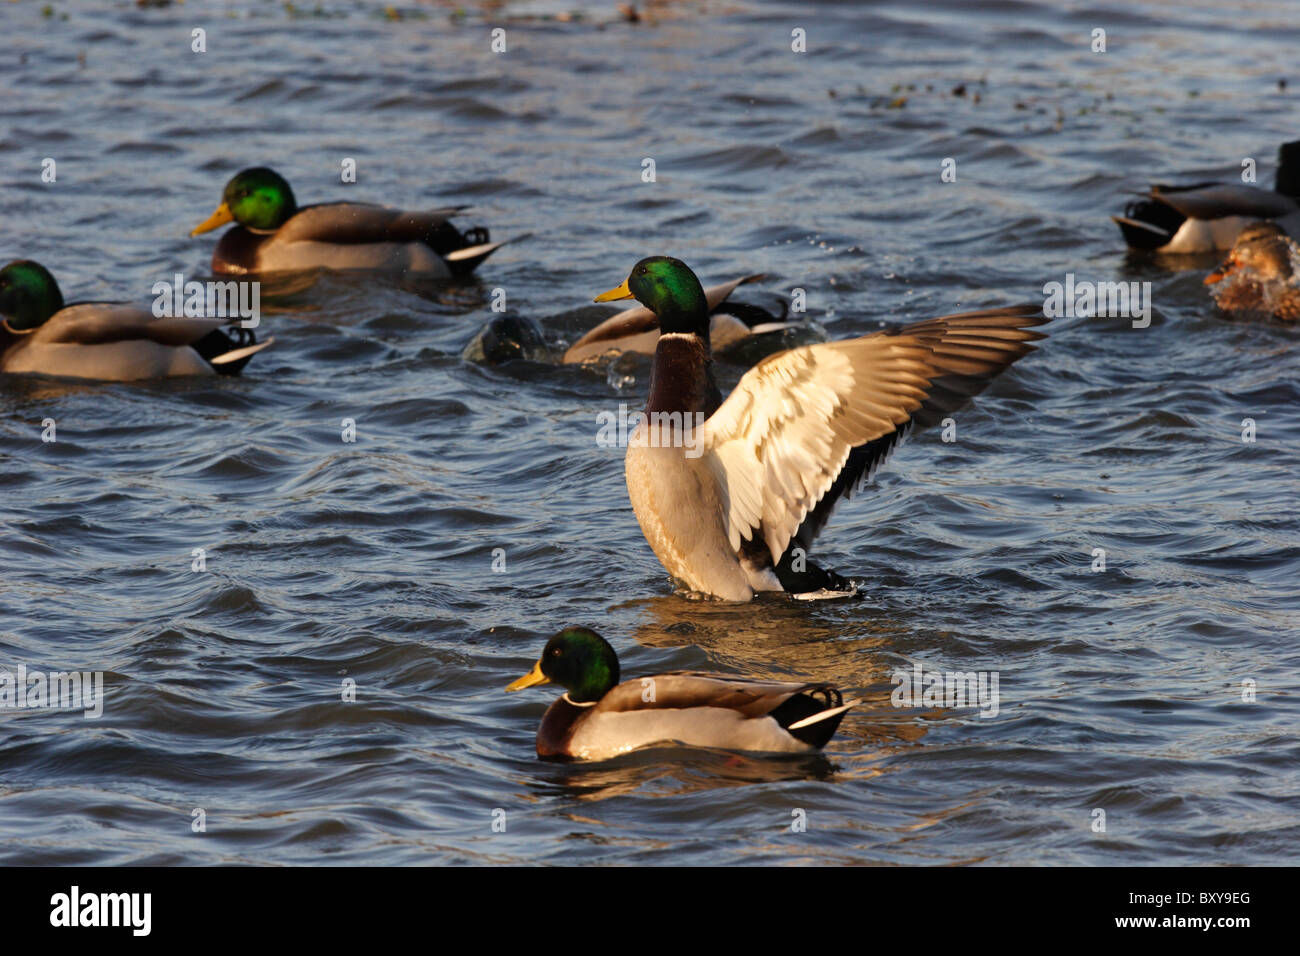 A  group of male mallard ducks(Anas platyrhynchos) on the James river in Chesterfield, Virginia, USA Stock Photo